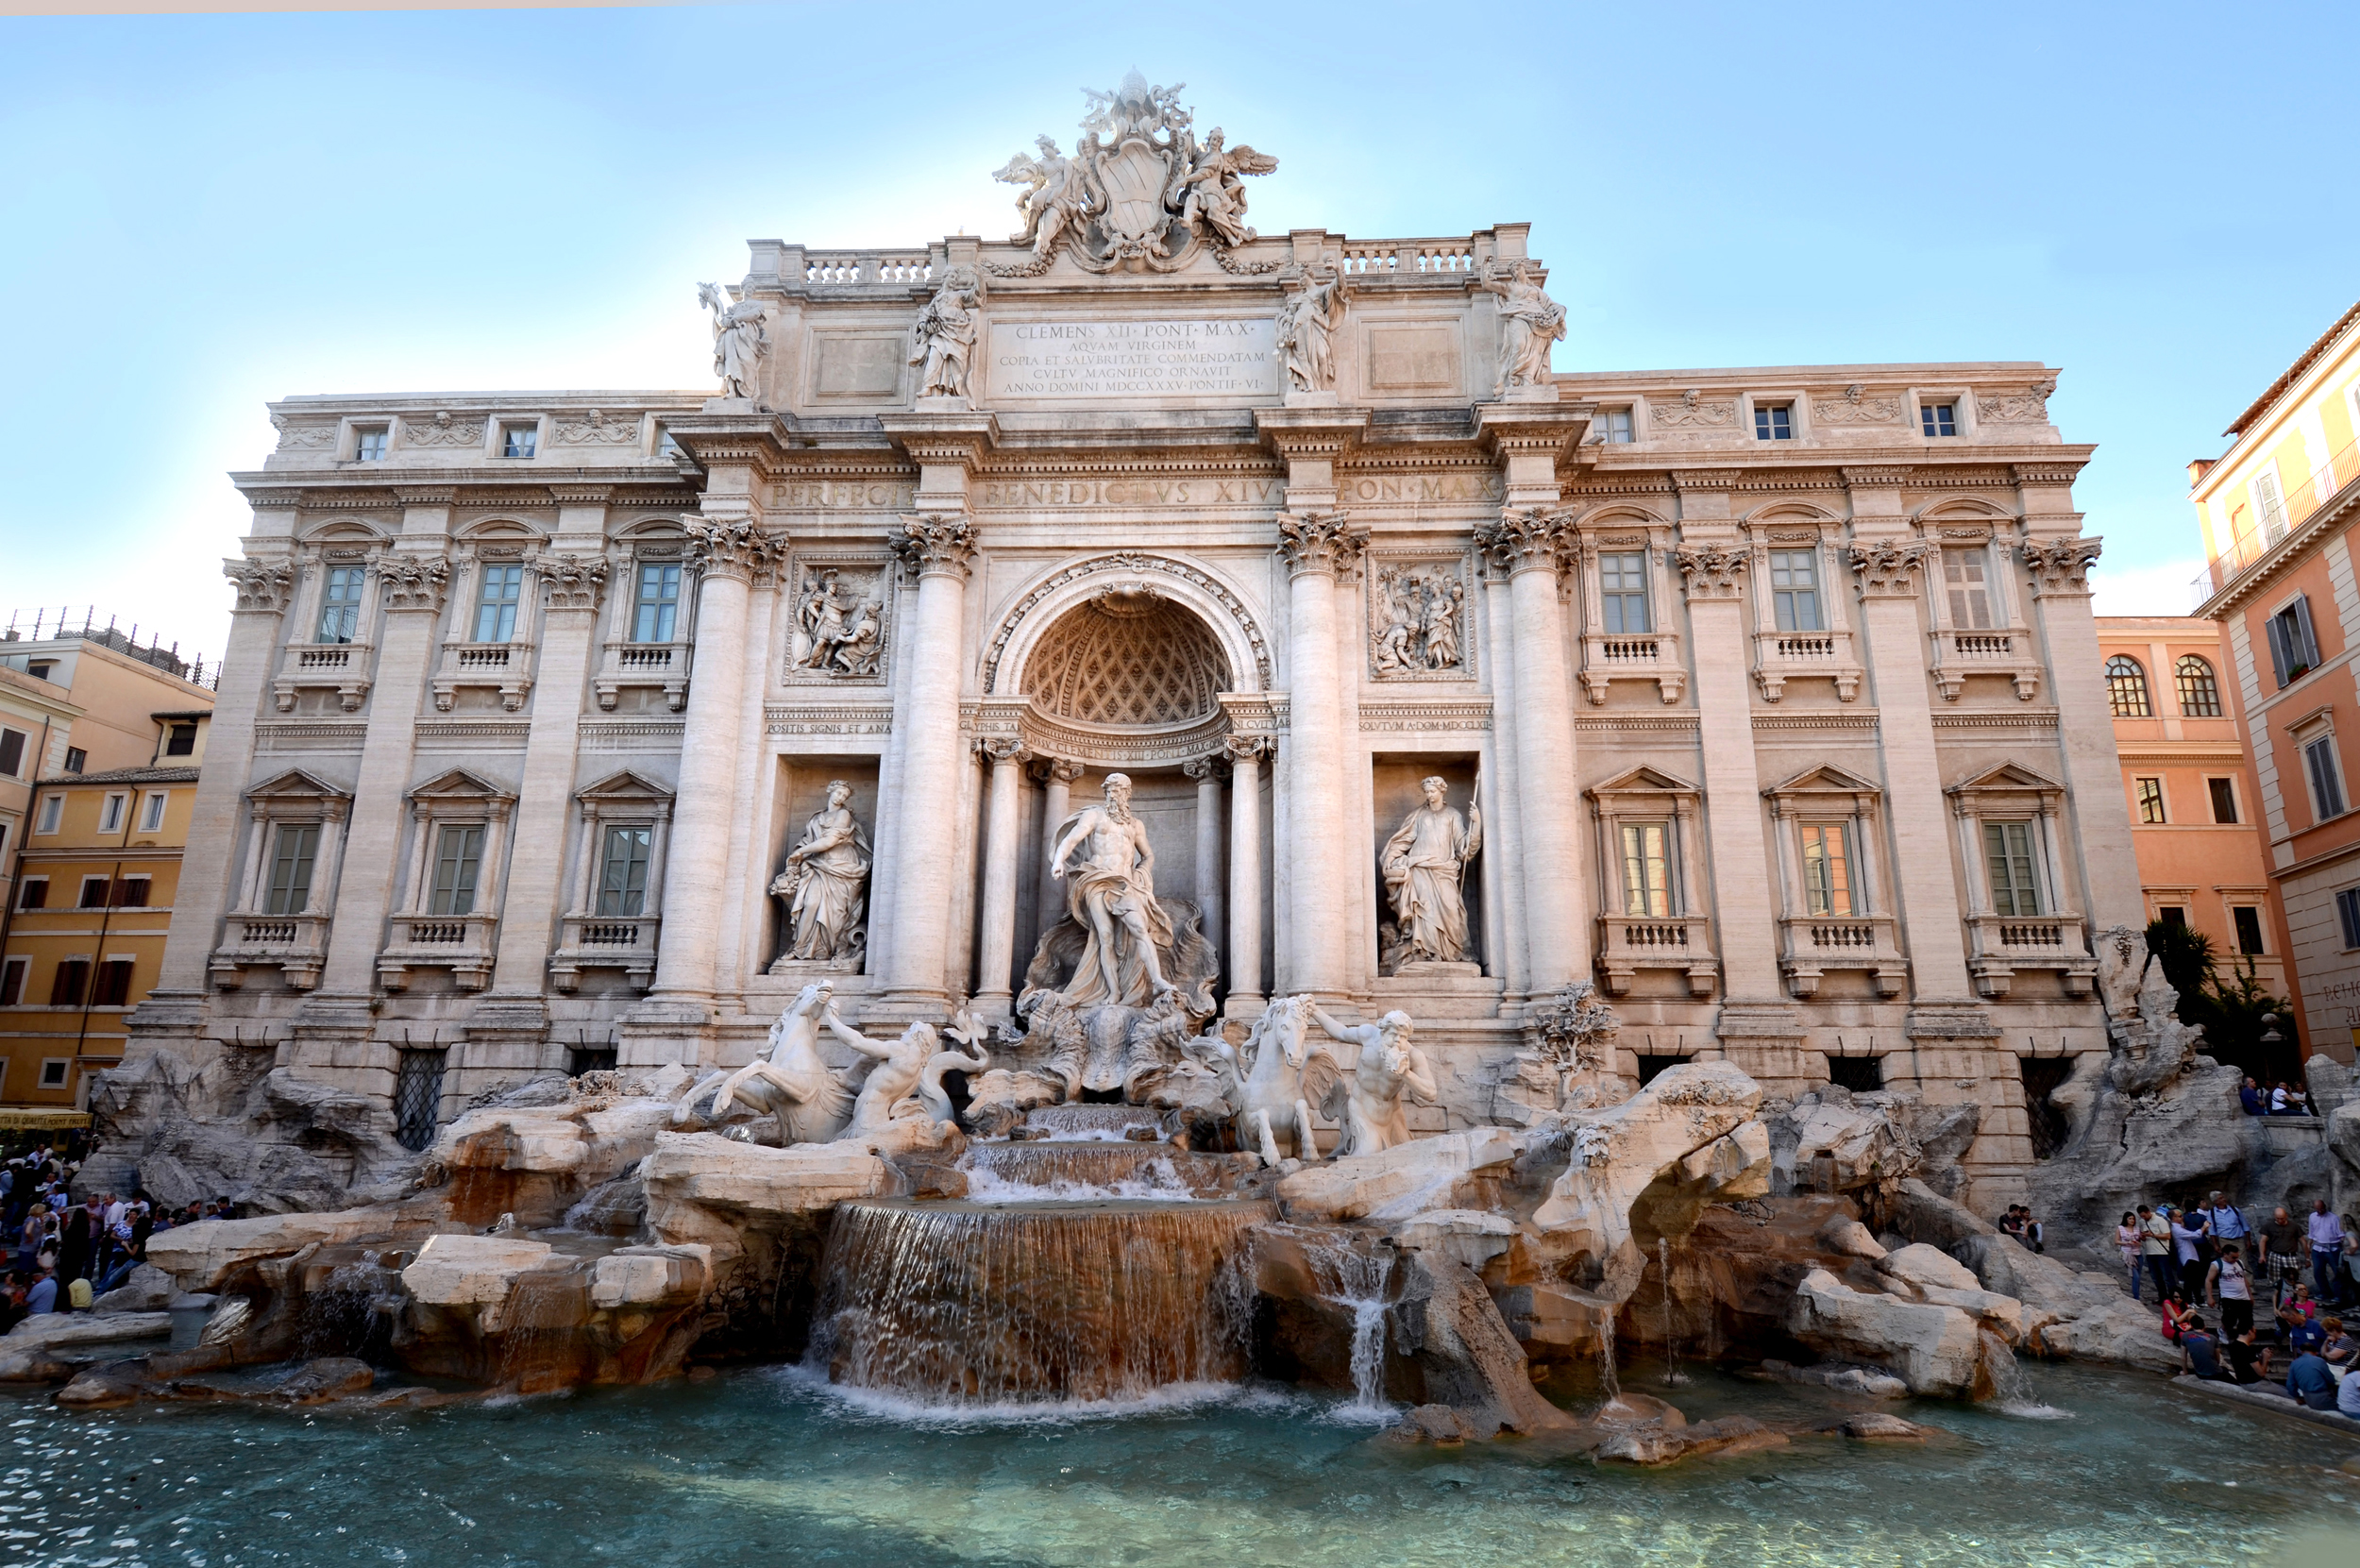 Rome's Trevi Fountain Holds Nearly $1.5 Million in Loose Change